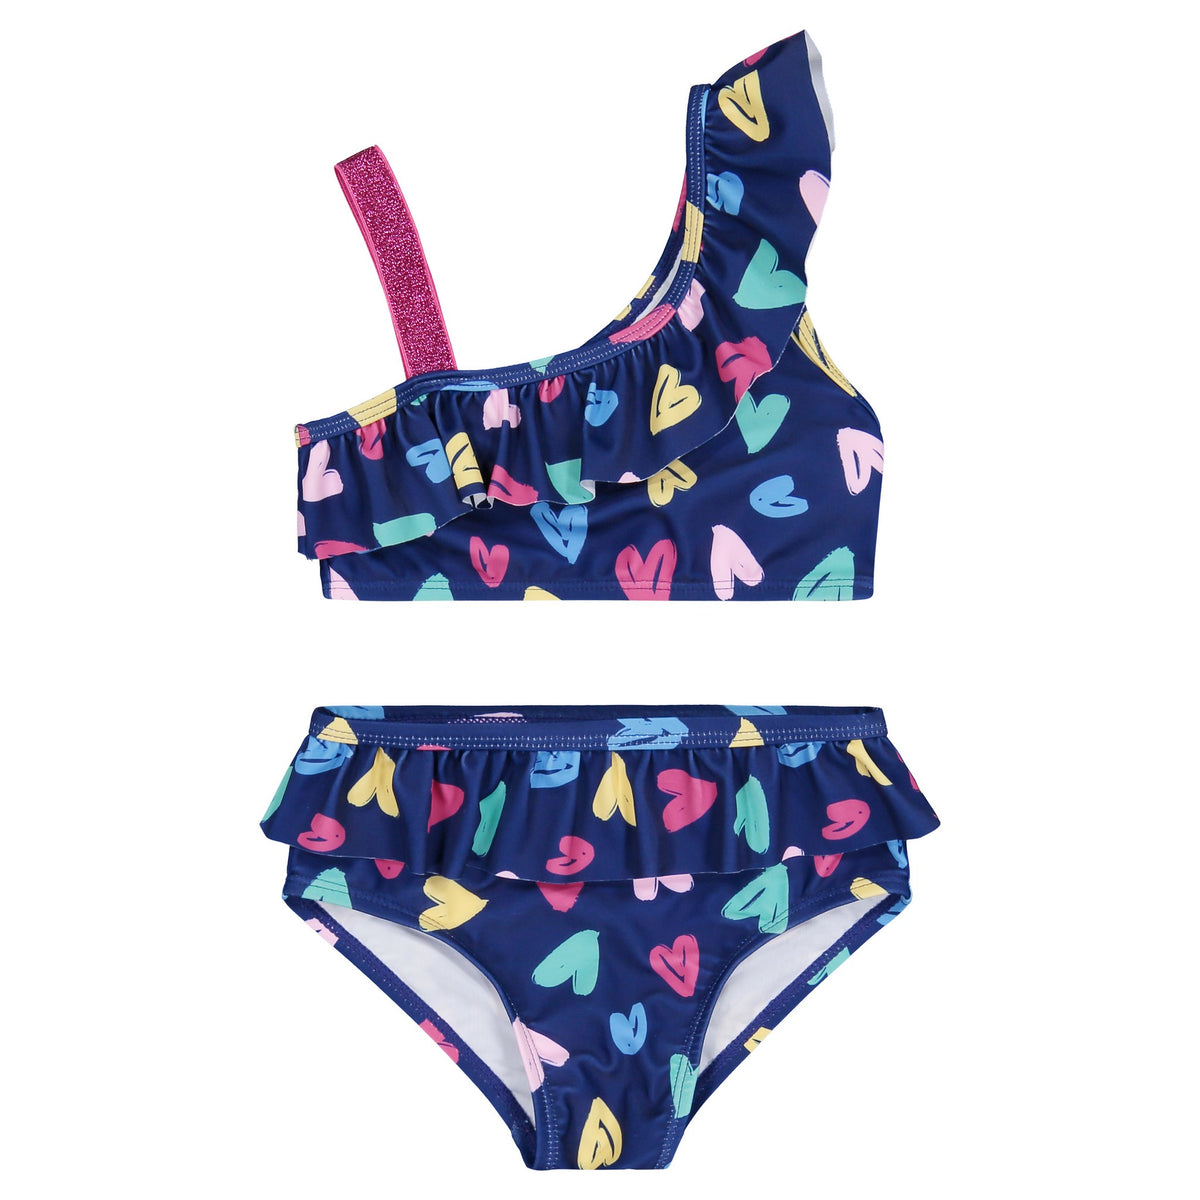  2 Piece Reversible Blue and Plaid Girls Swimsuit Set